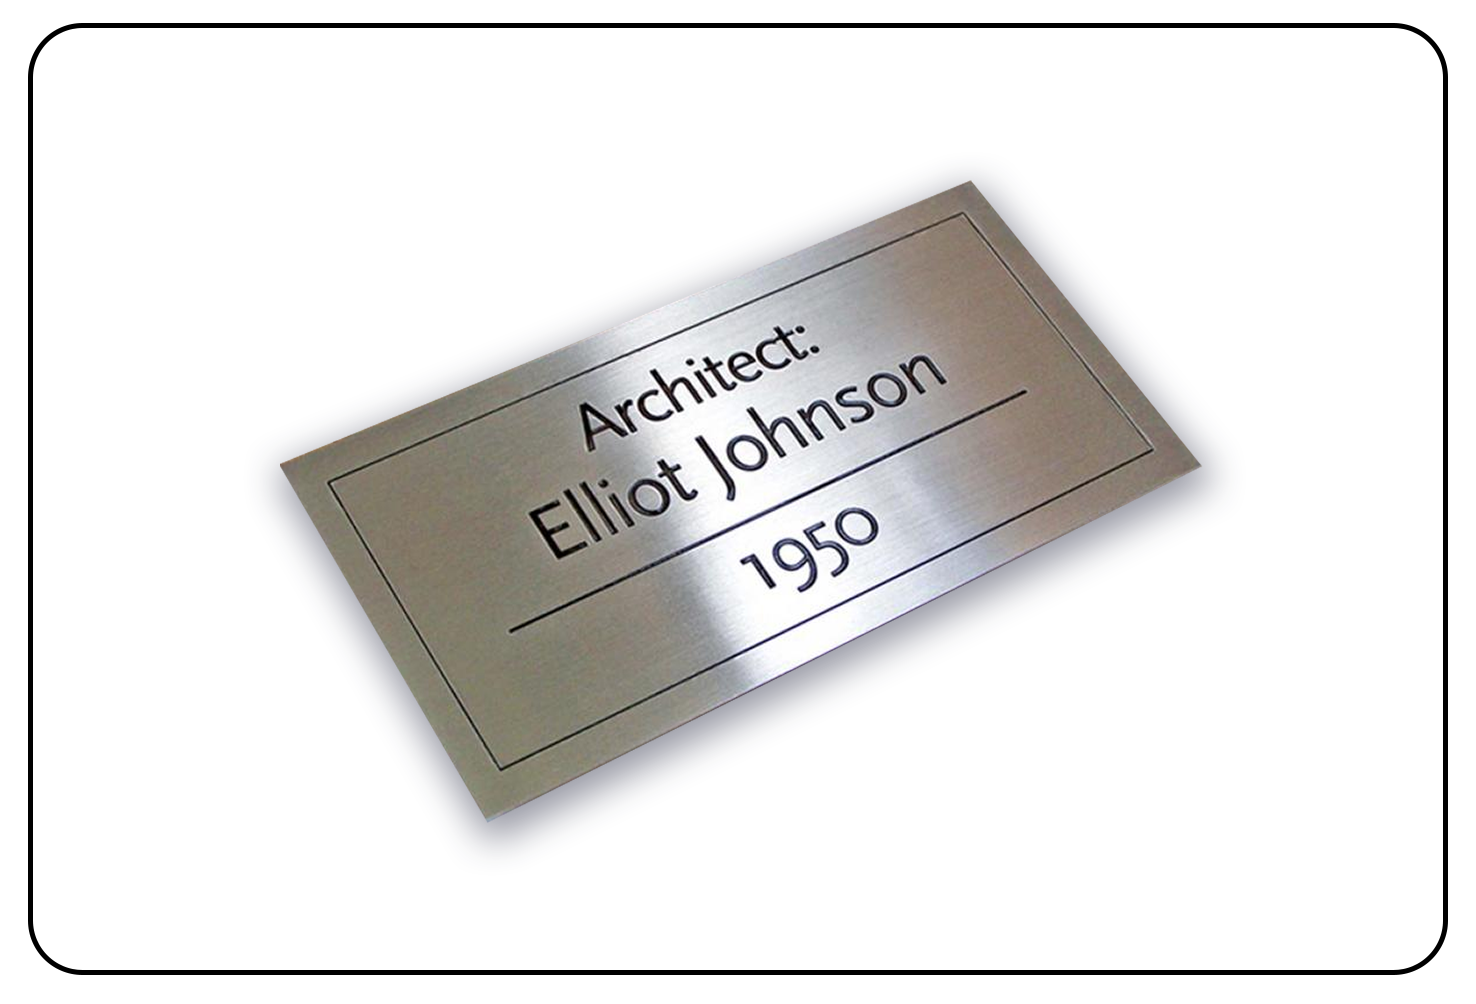 Precise PVC engraving for durable signage.